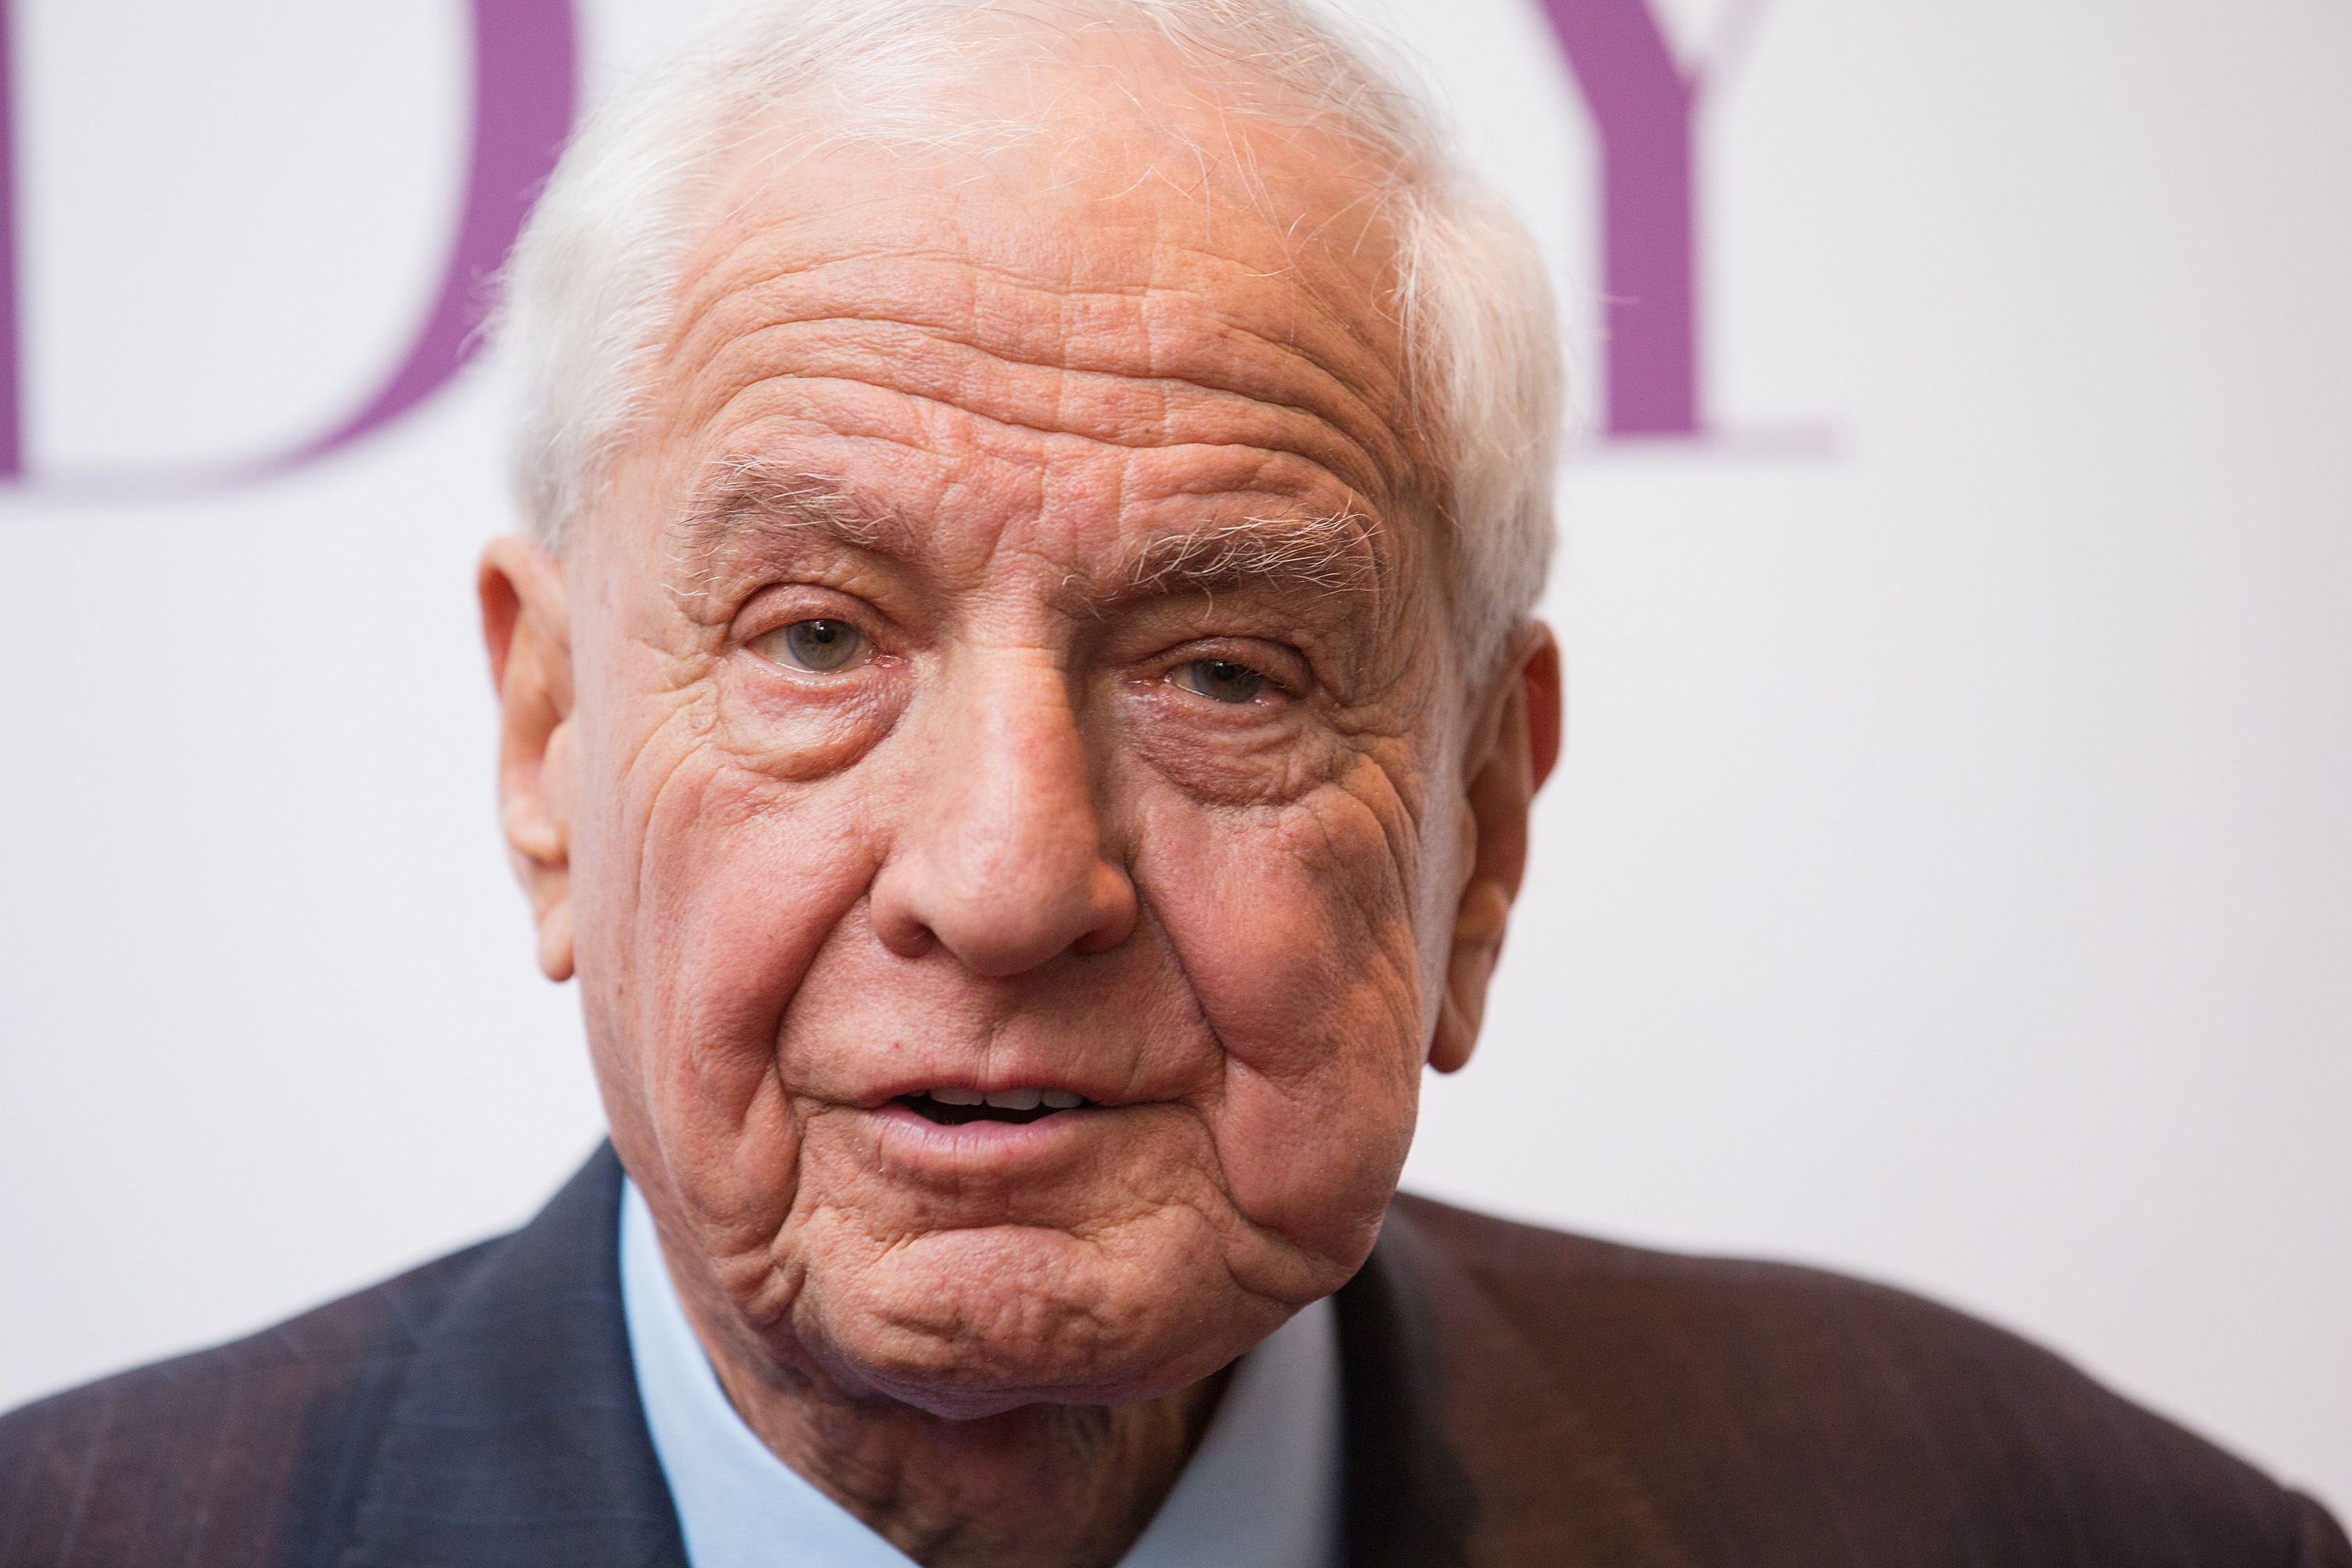 American actor, director, writer, and producer Garry Marshall arrives at the Seattle premiere of 'Mother's Day' before receiving a Lifetime Achievement Award presented by the Seattle International Film Festival at Cinerama Theater on April 25, 2016 in Seattle, Washington. (Mat Hayward—Getty Images)